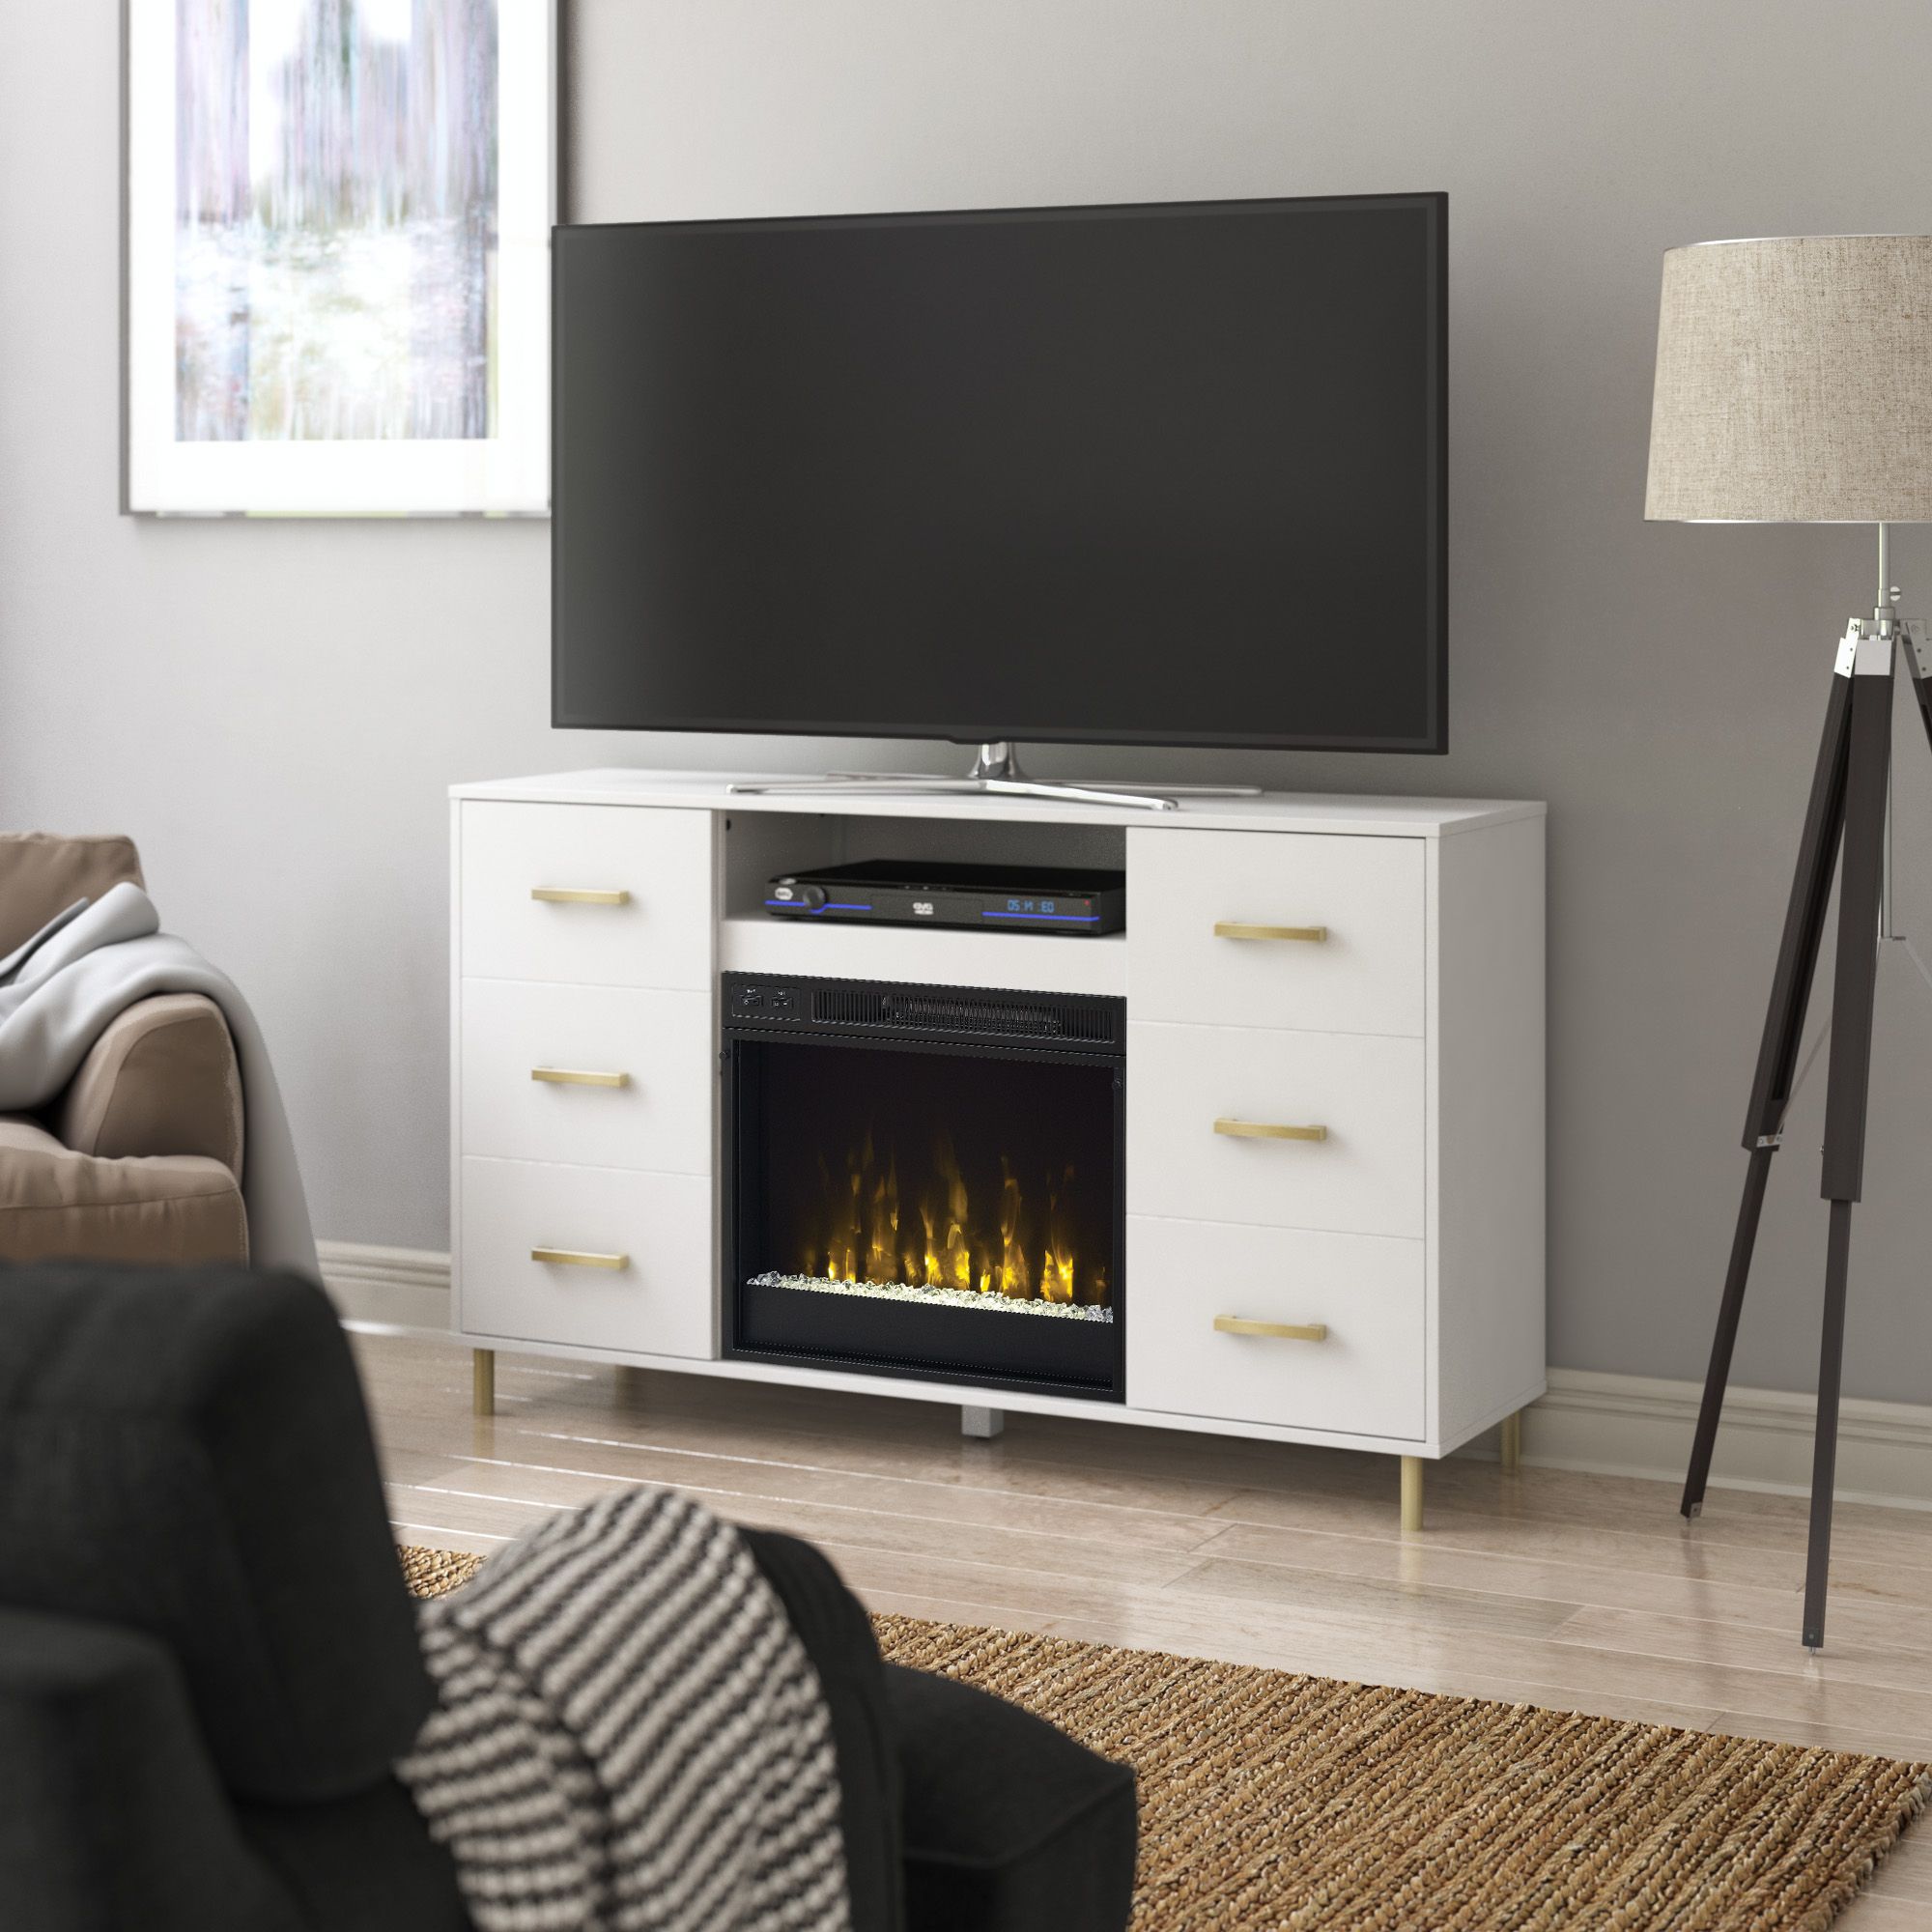 Tv Stand For Tvs Up To 60" With Electric Fireplace With Regard To 2019 Evanston Tv Stands For Tvs Up To 60" (View 1 of 20)